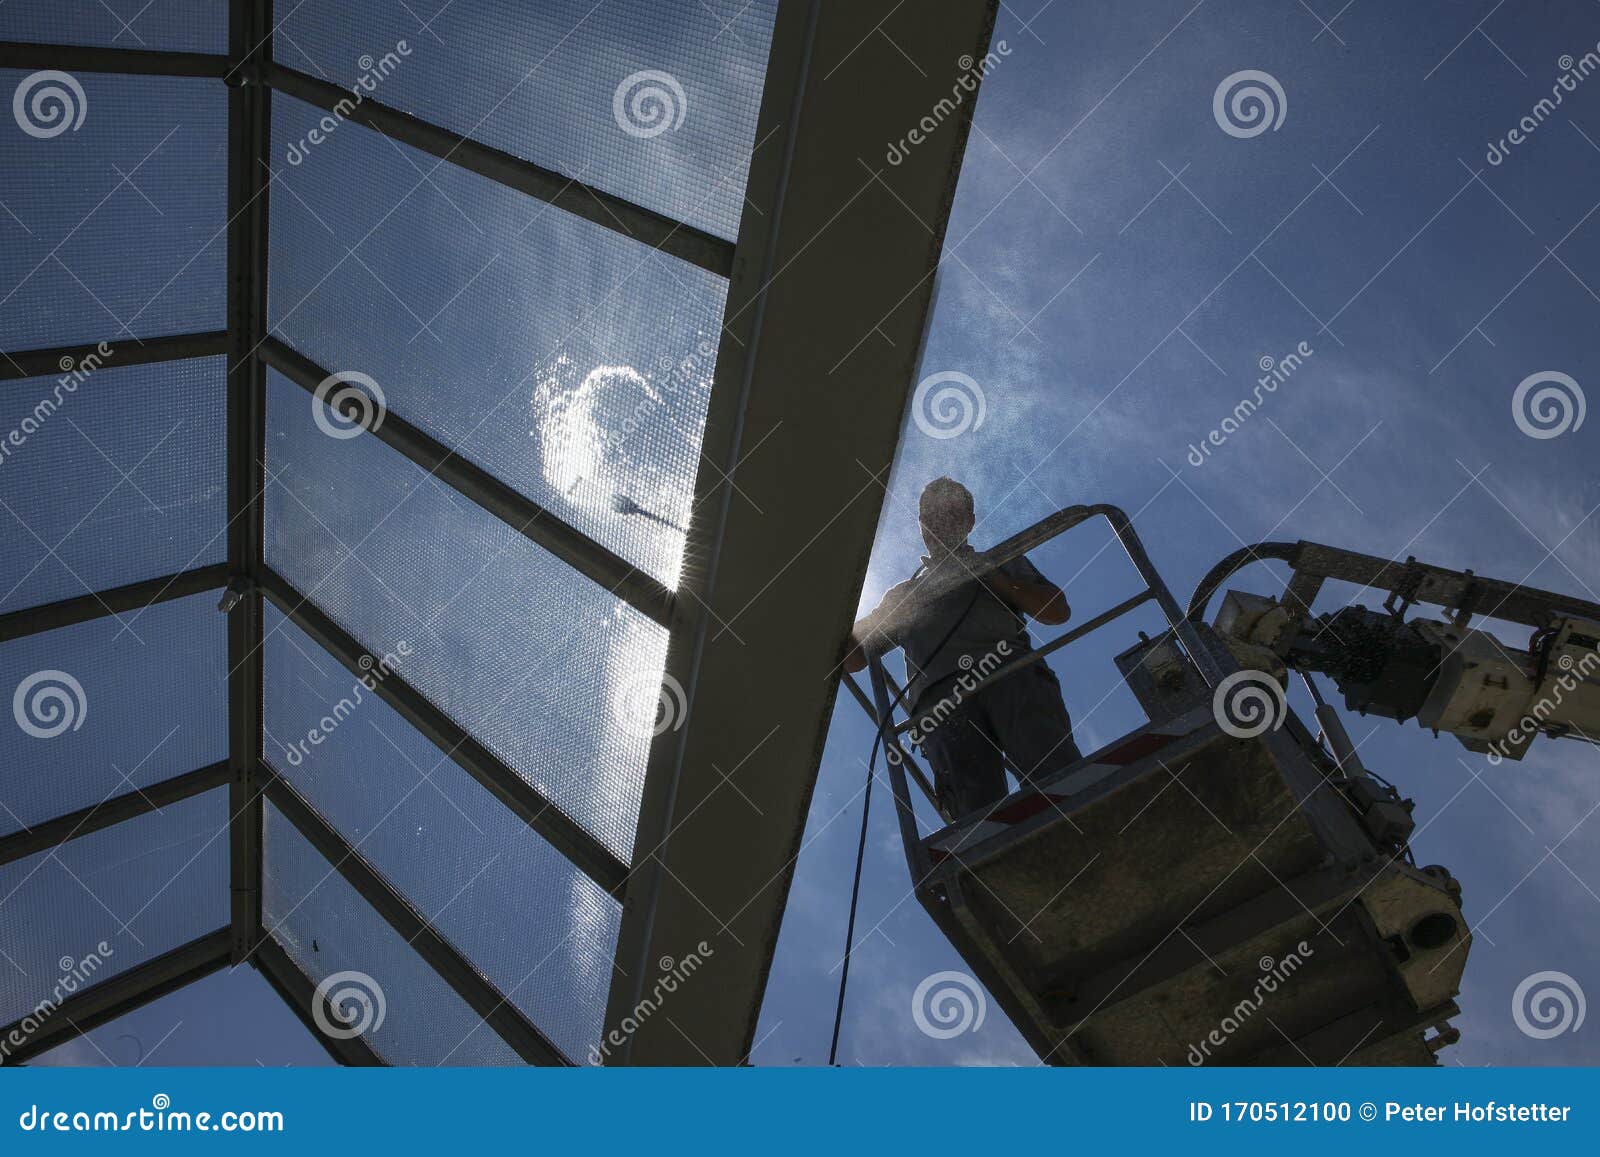 worker of professional facade cleaning services washing a glass